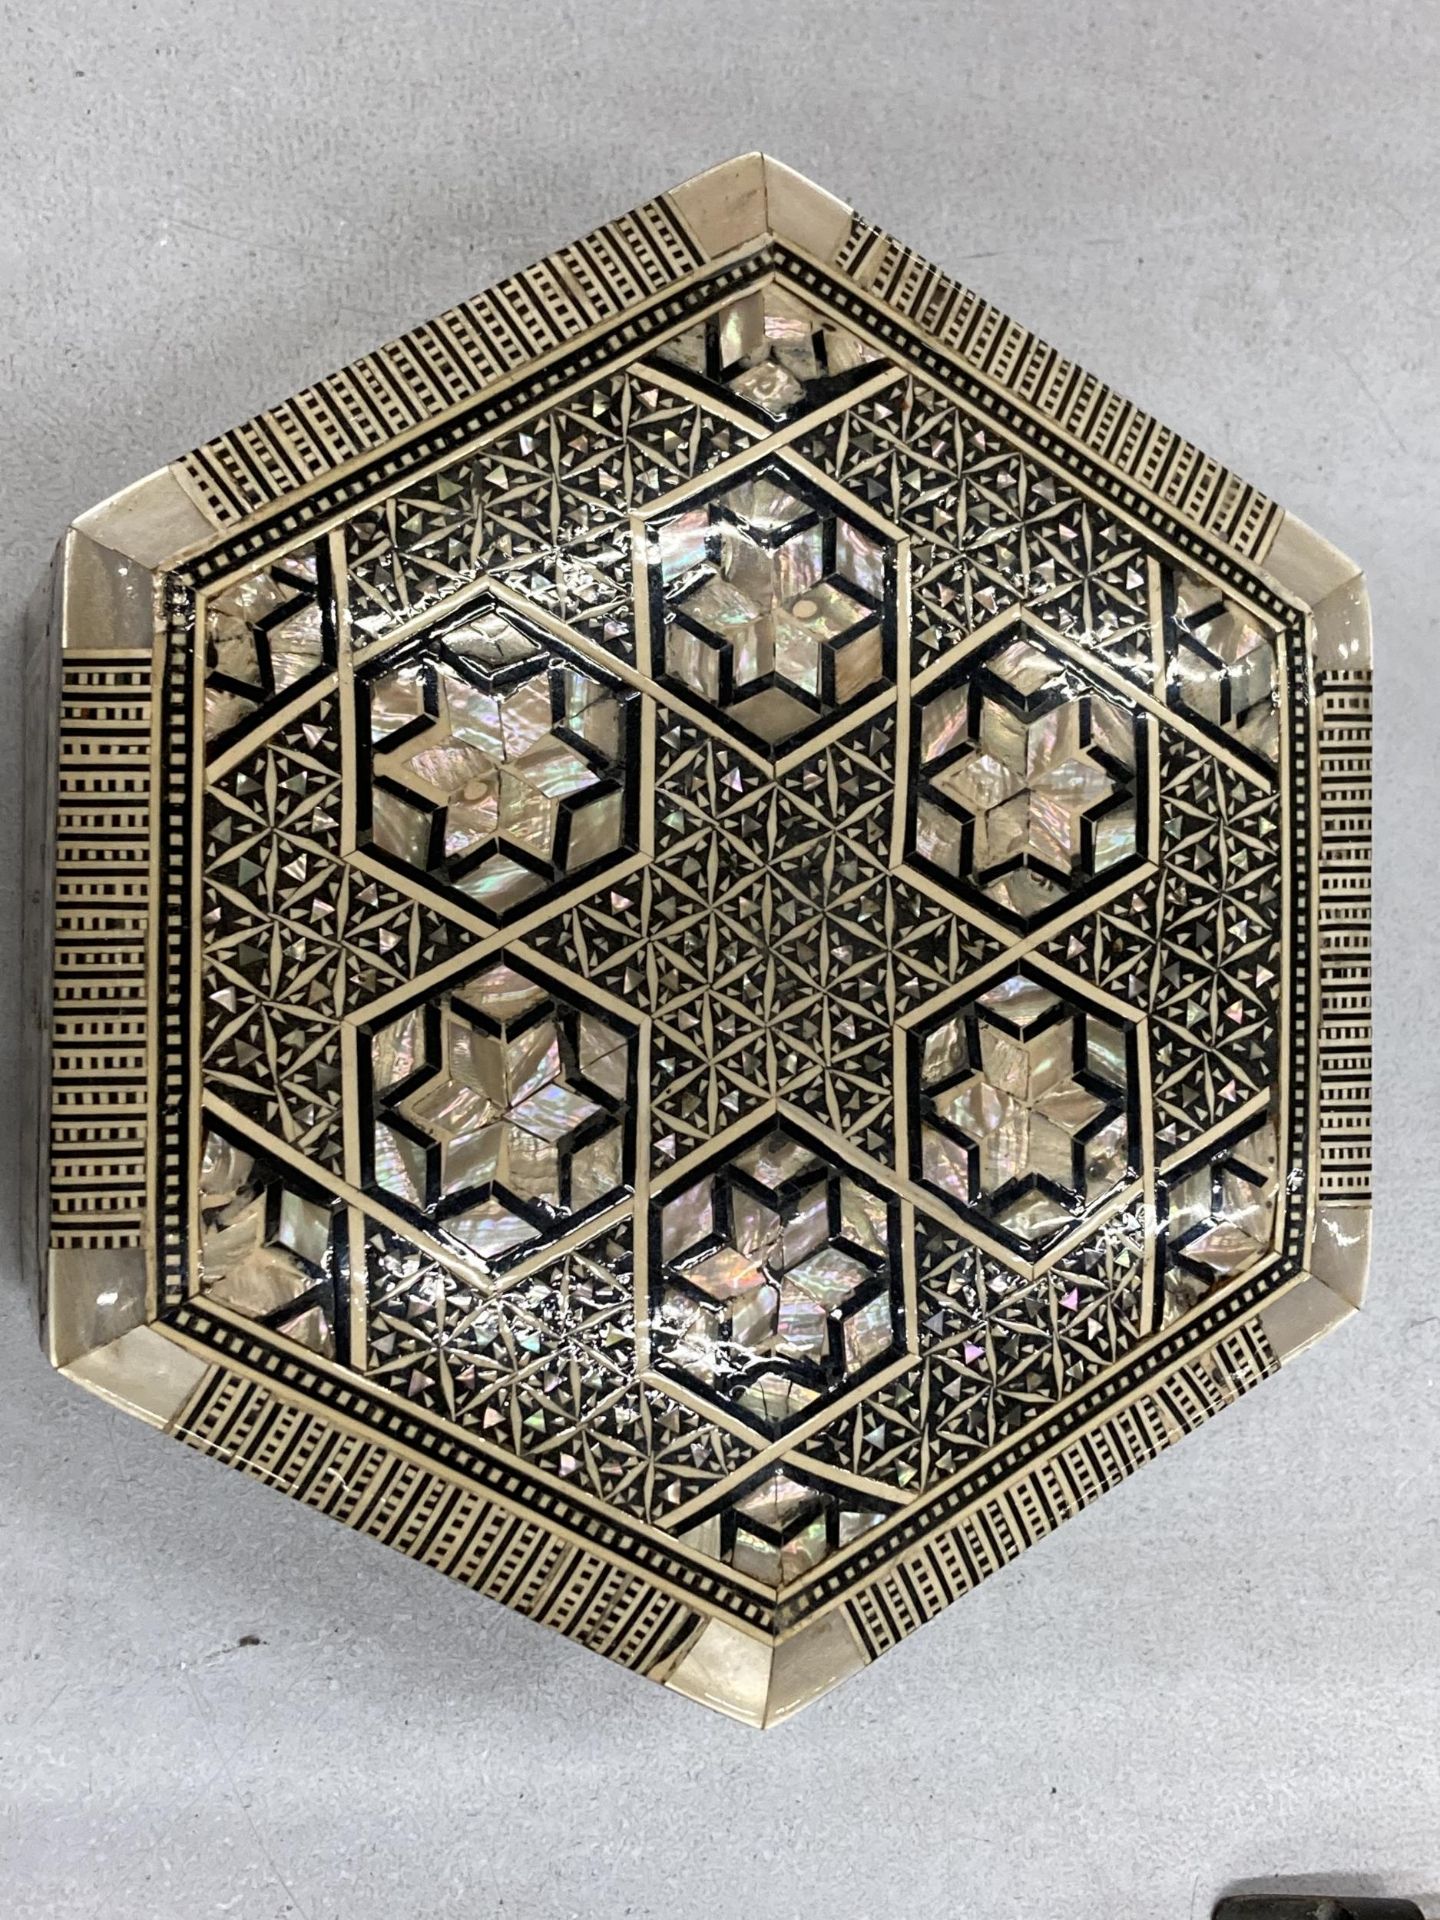 A DAMASK, MOTHER OF PEARL INLAID HEXAGONAL BOX - Image 3 of 3